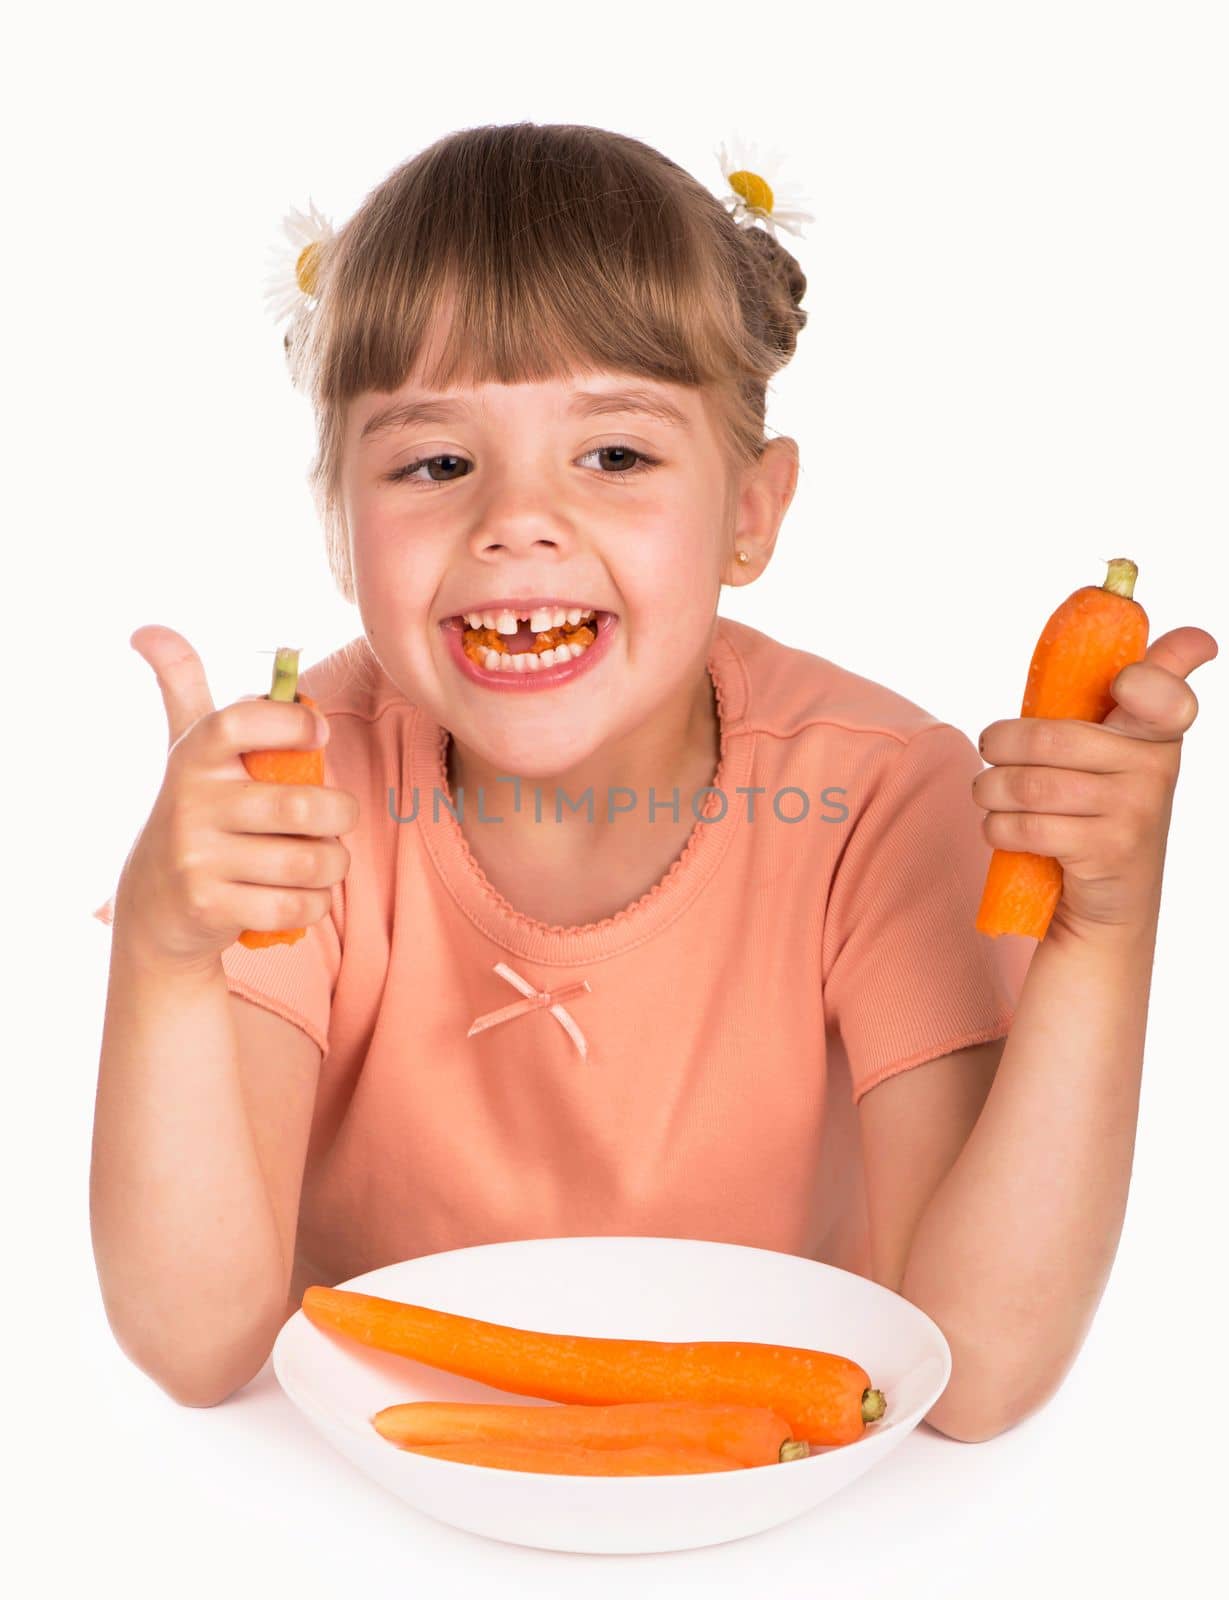 Problems of pediatric dentistry. Little girl in an orange t-shirt and flowers in her hair eats a carrot on a white background by aprilphoto